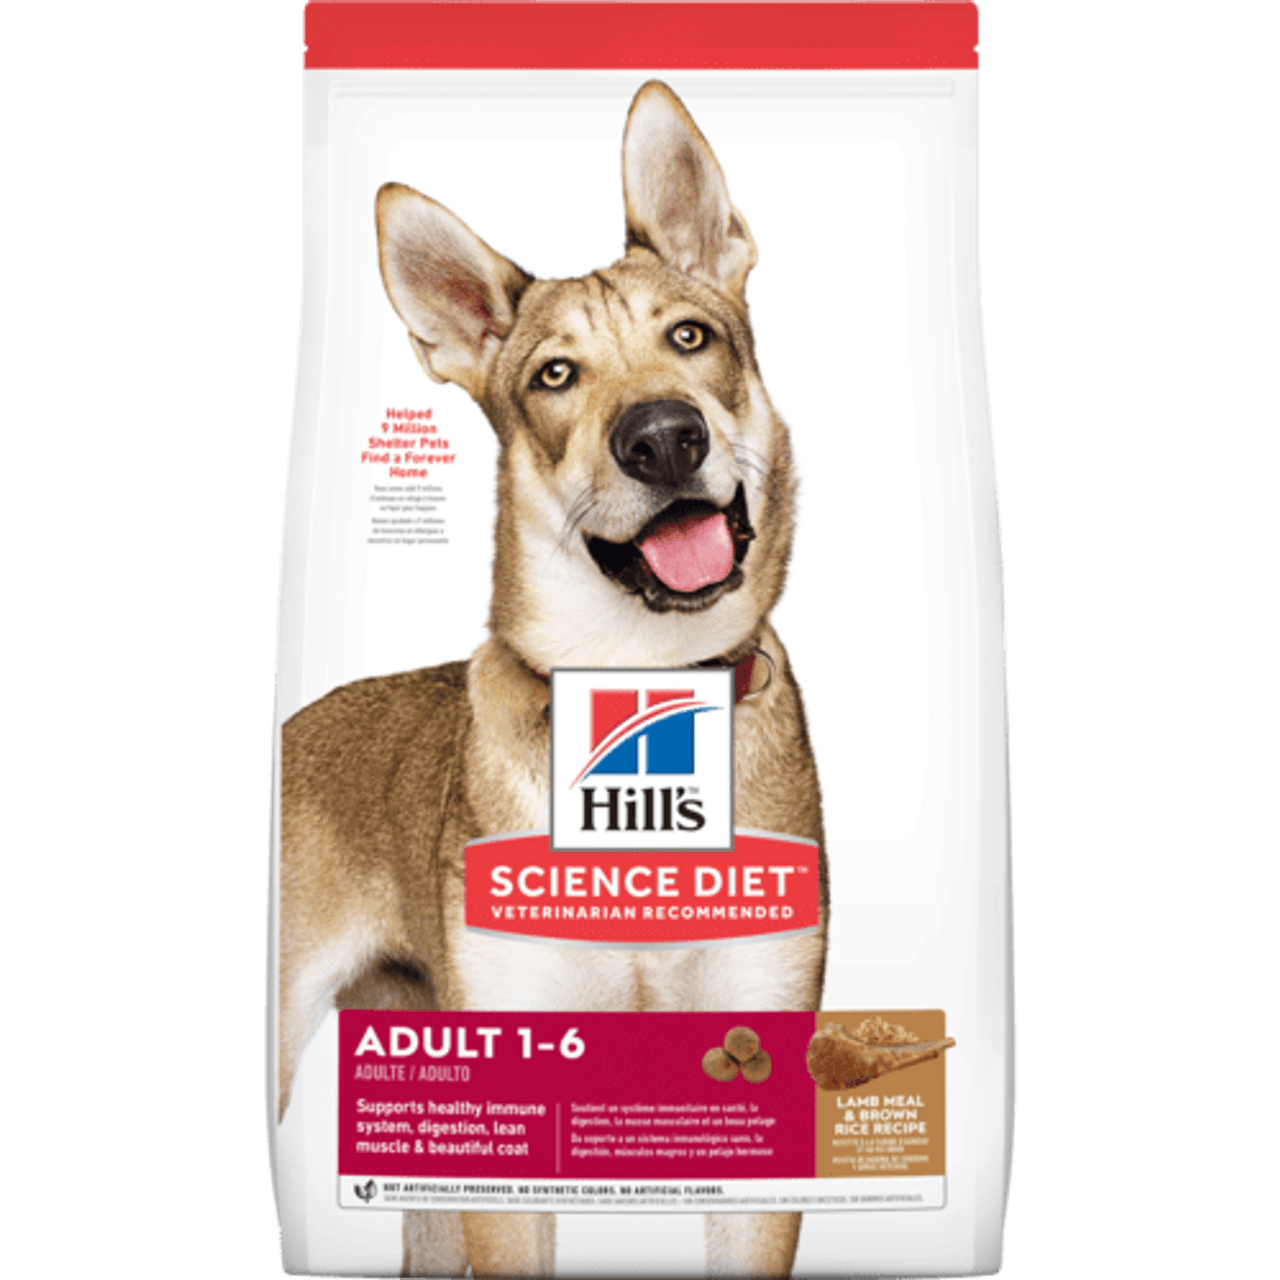 Hill's Science Diet Adult Lamb Meal & Brown Rice Dog Food 15.5lb